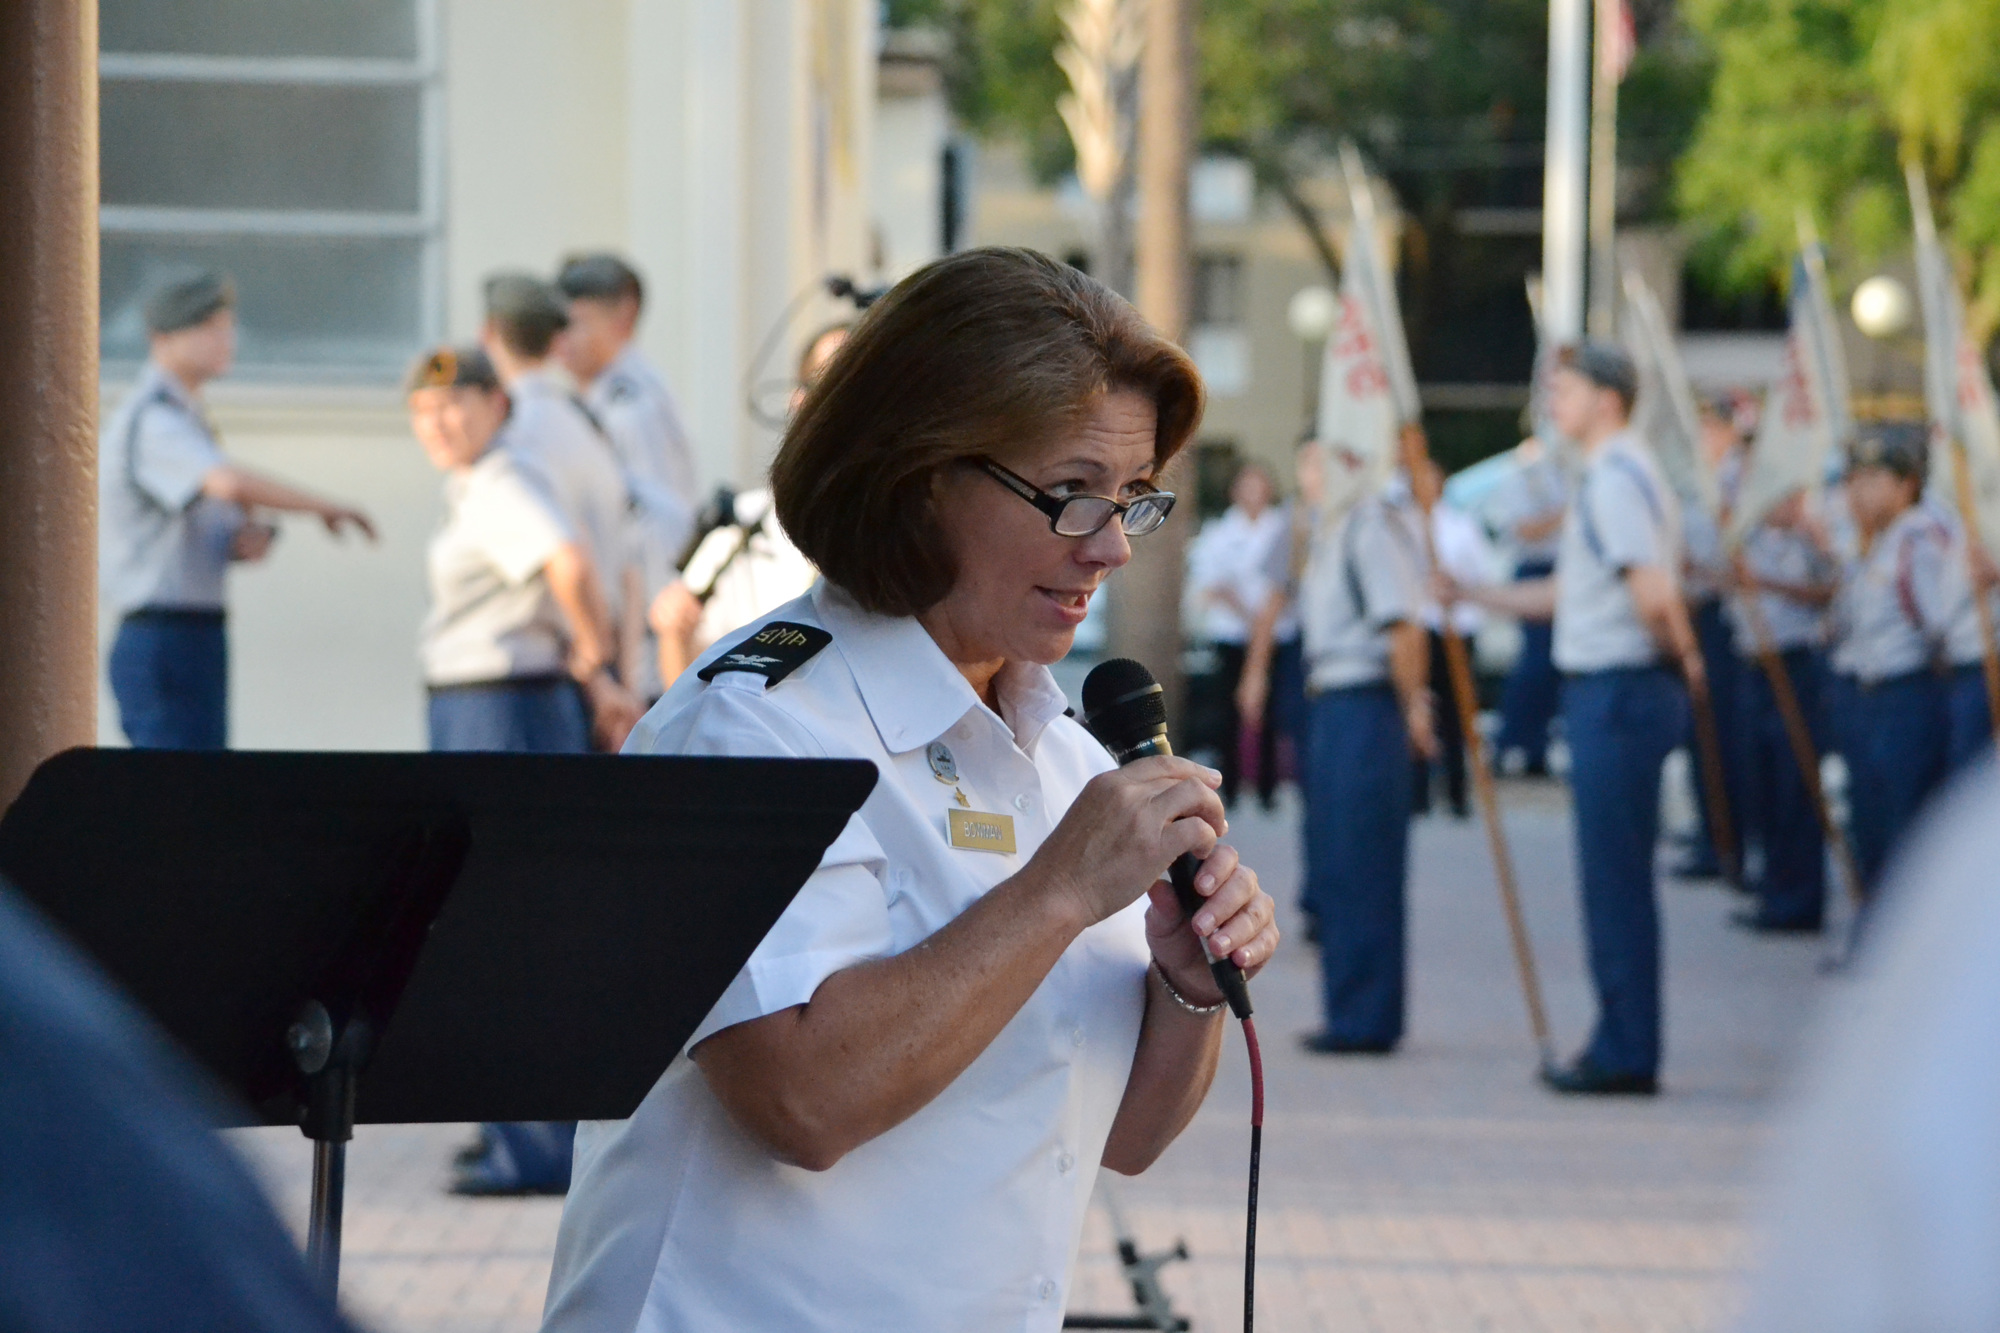 Sarasota Military Academy Head of School Christina Bowman addresses cadets during morning formation.